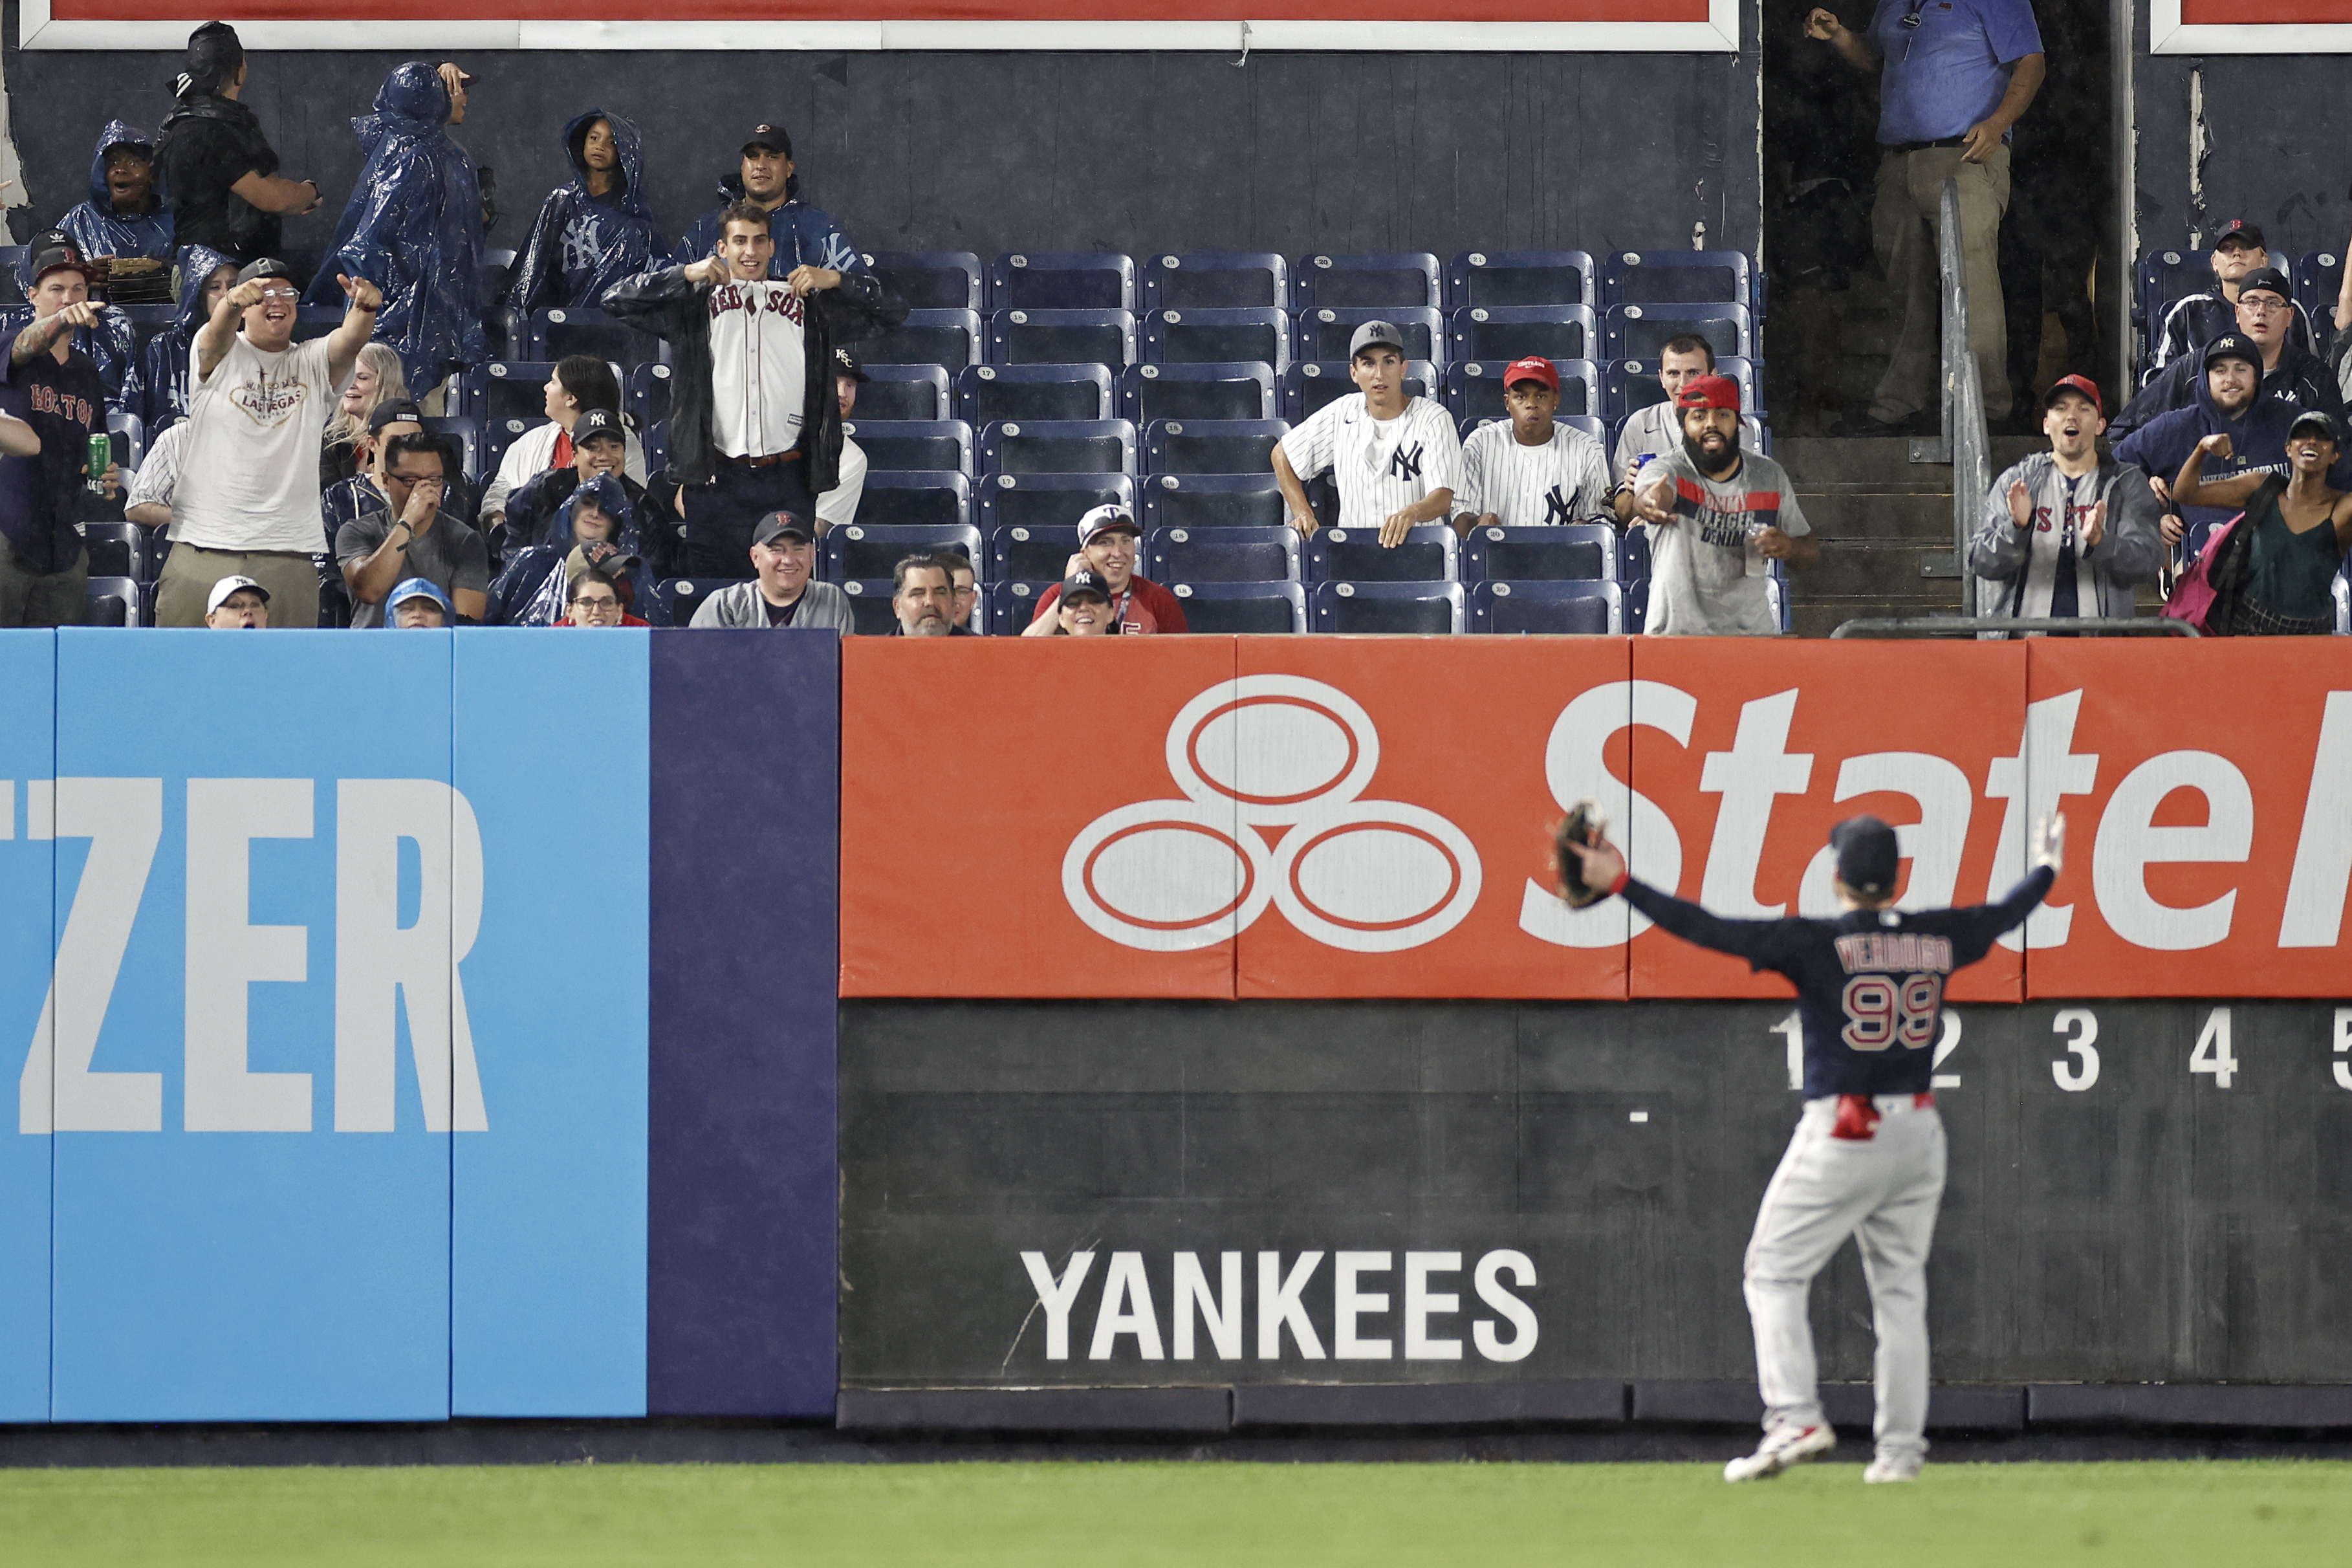 MLB: Alex Verdugo calls game to lead Red Sox in epic walk-off win vs.  Yankees